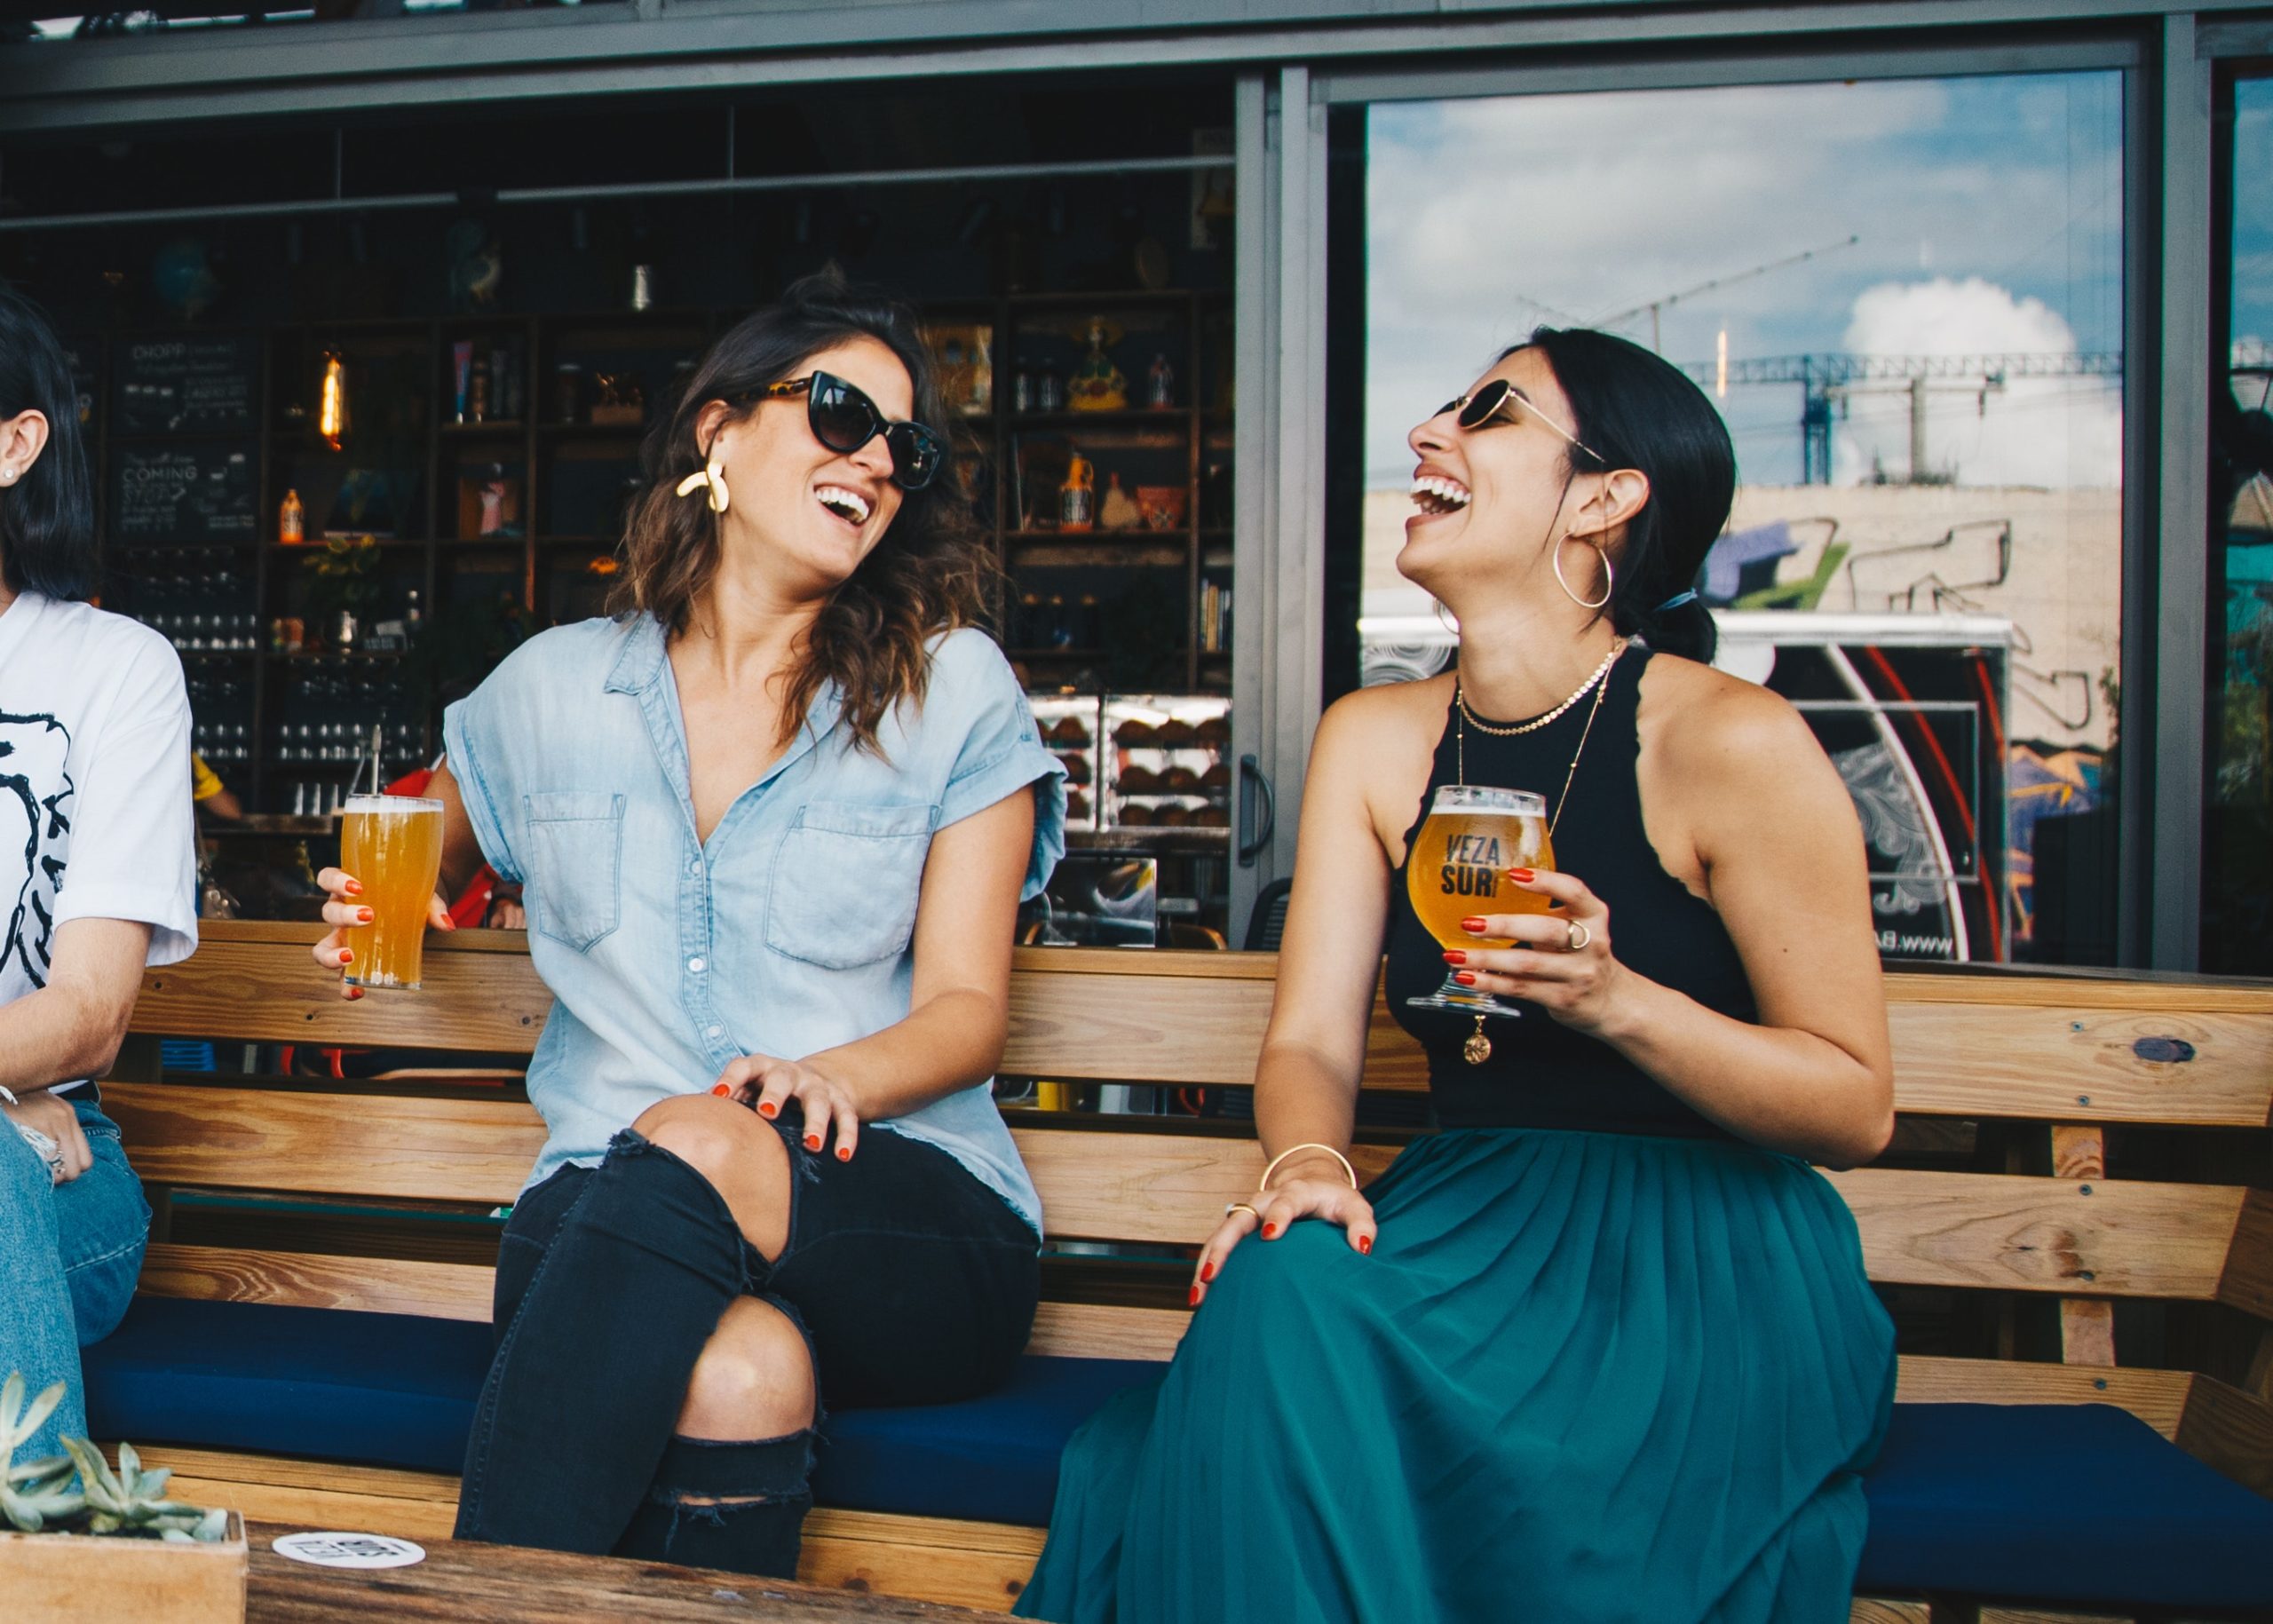 Two women sitting on a bench, one holding a drink, both laughing.